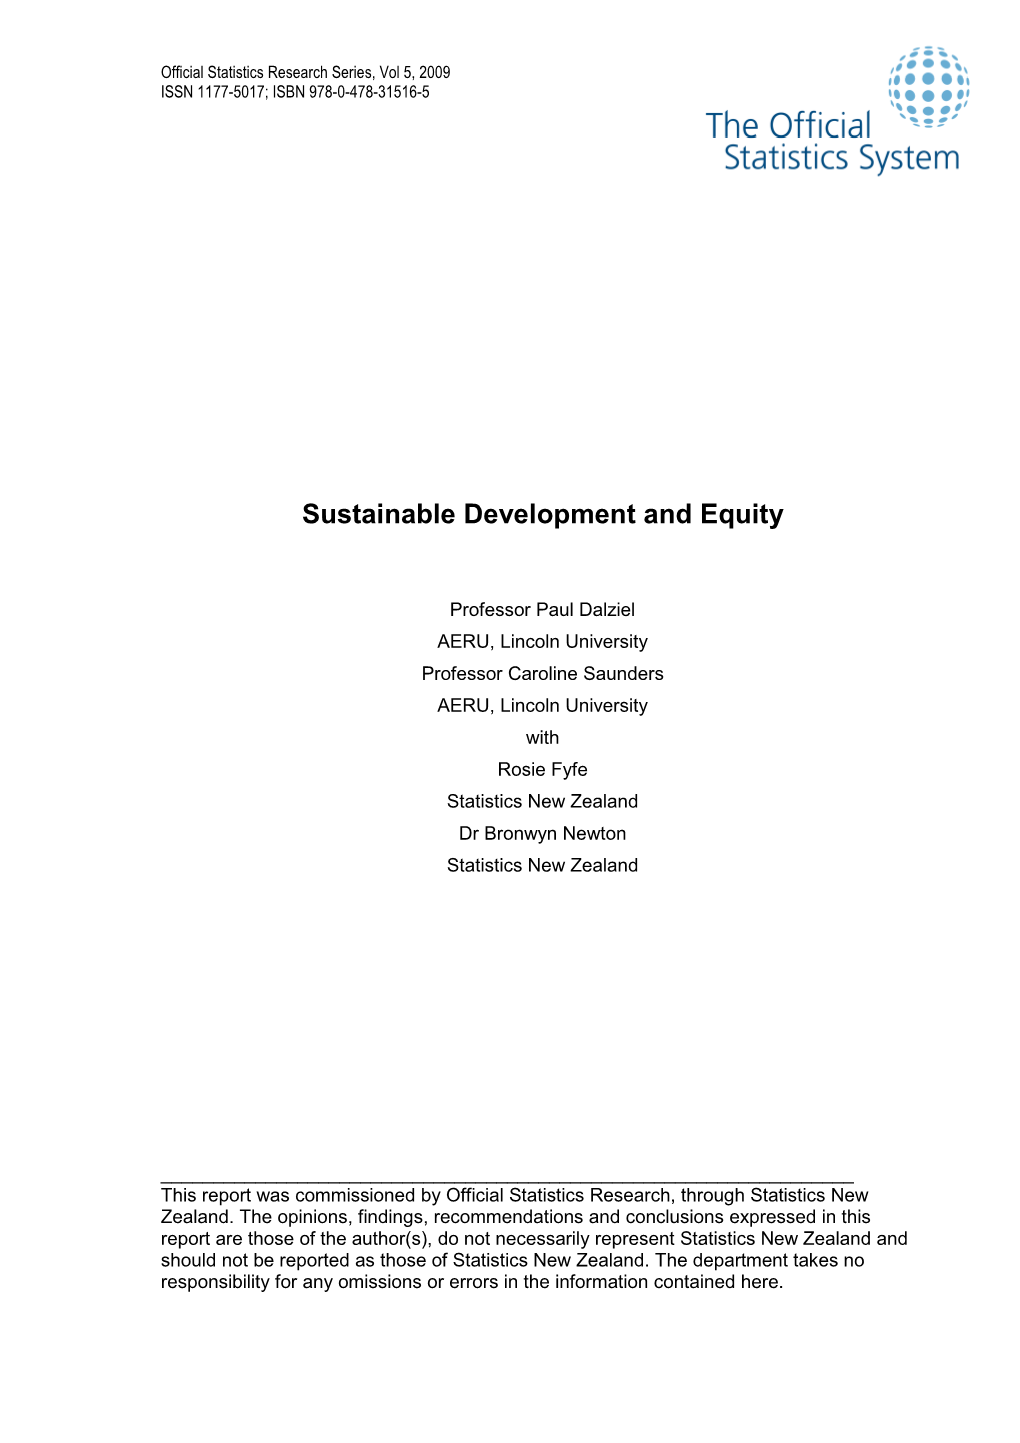 Sustainable Development and Equity